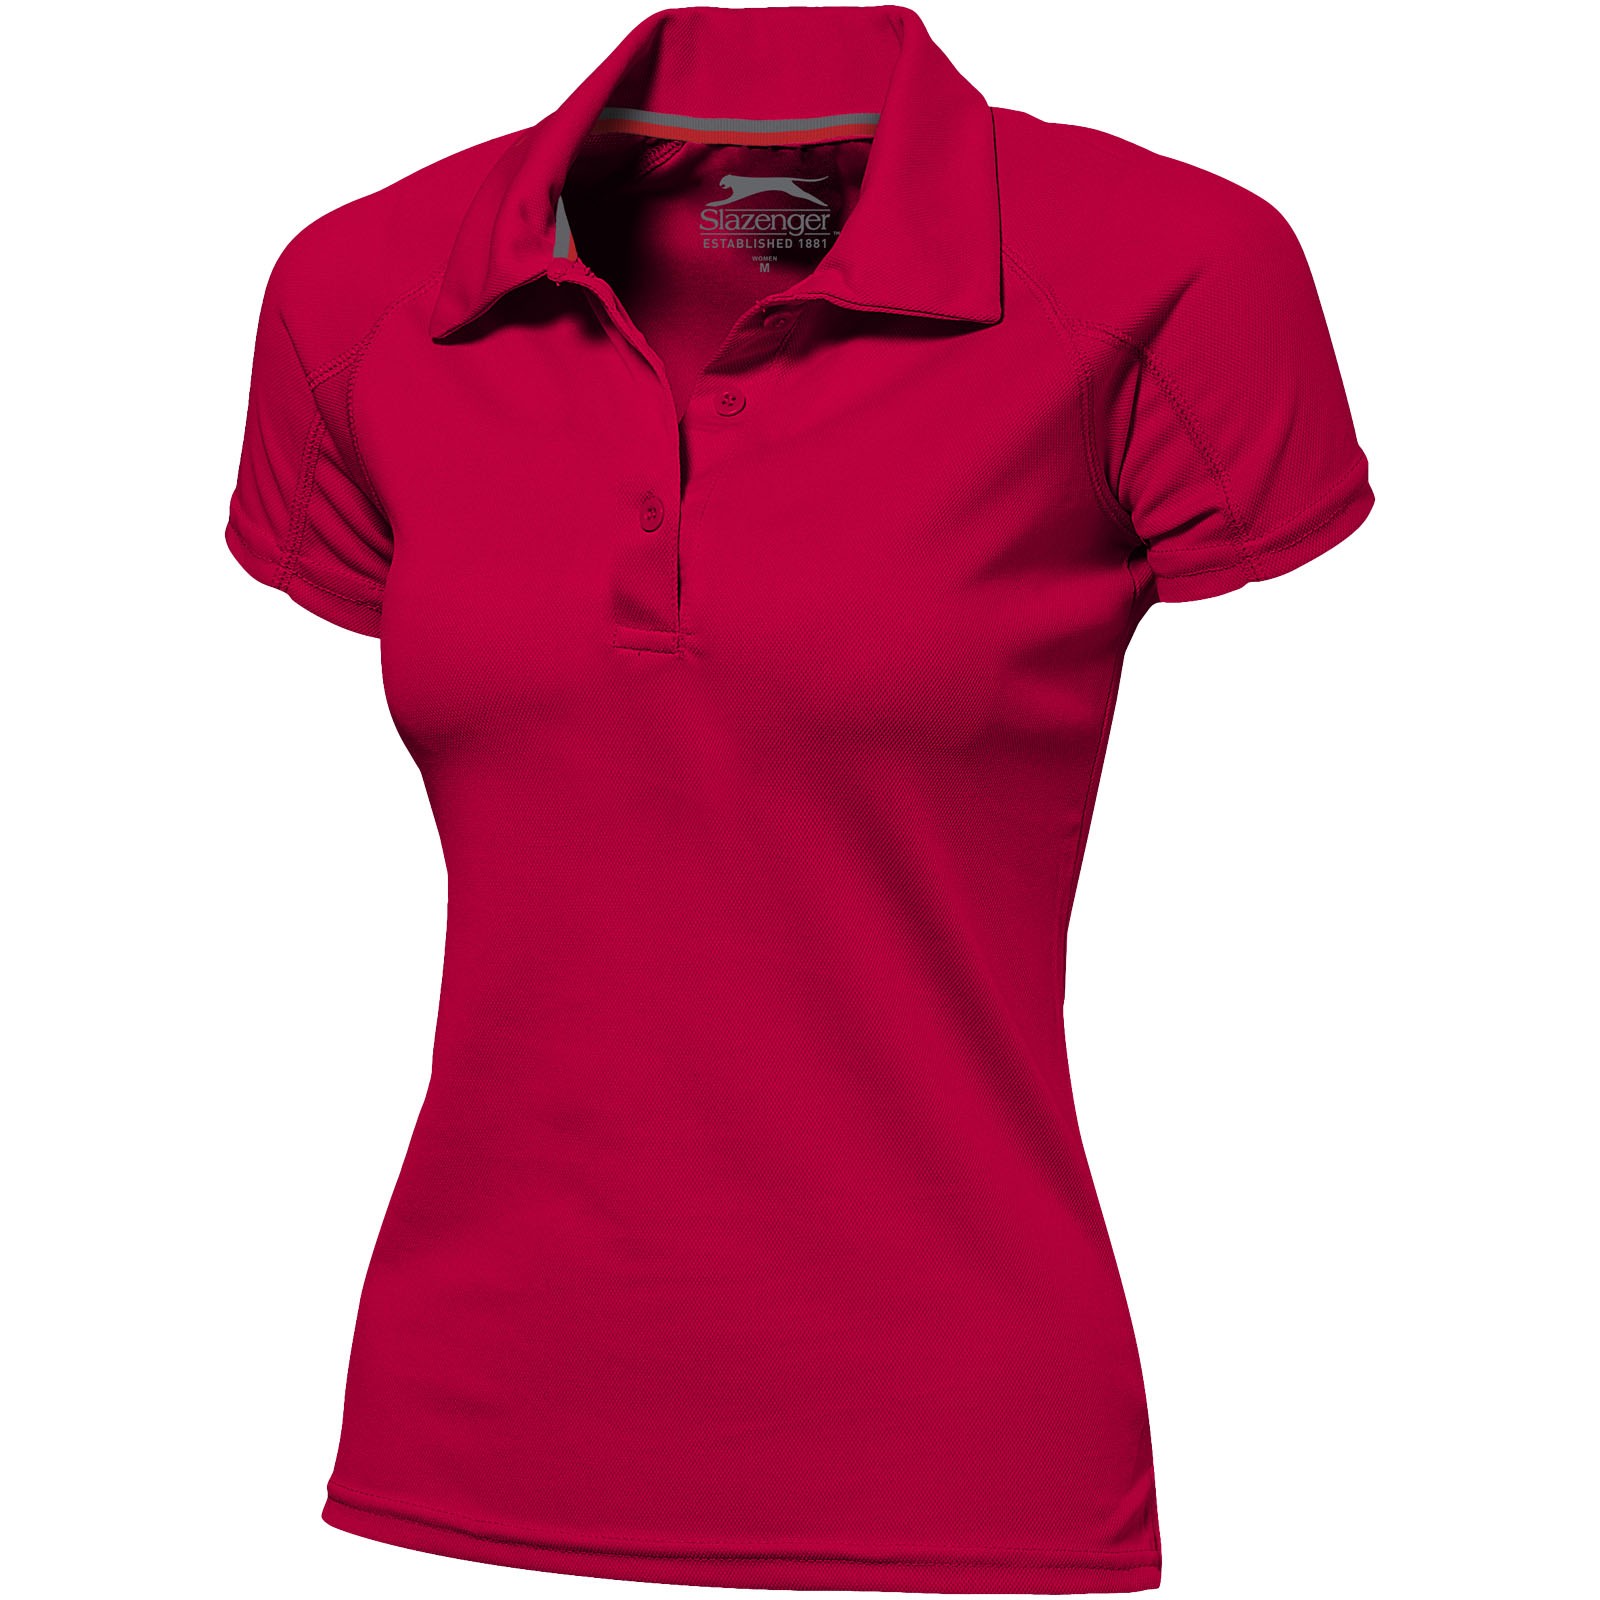 Game short sleeve women's cool fit polo - Red / S